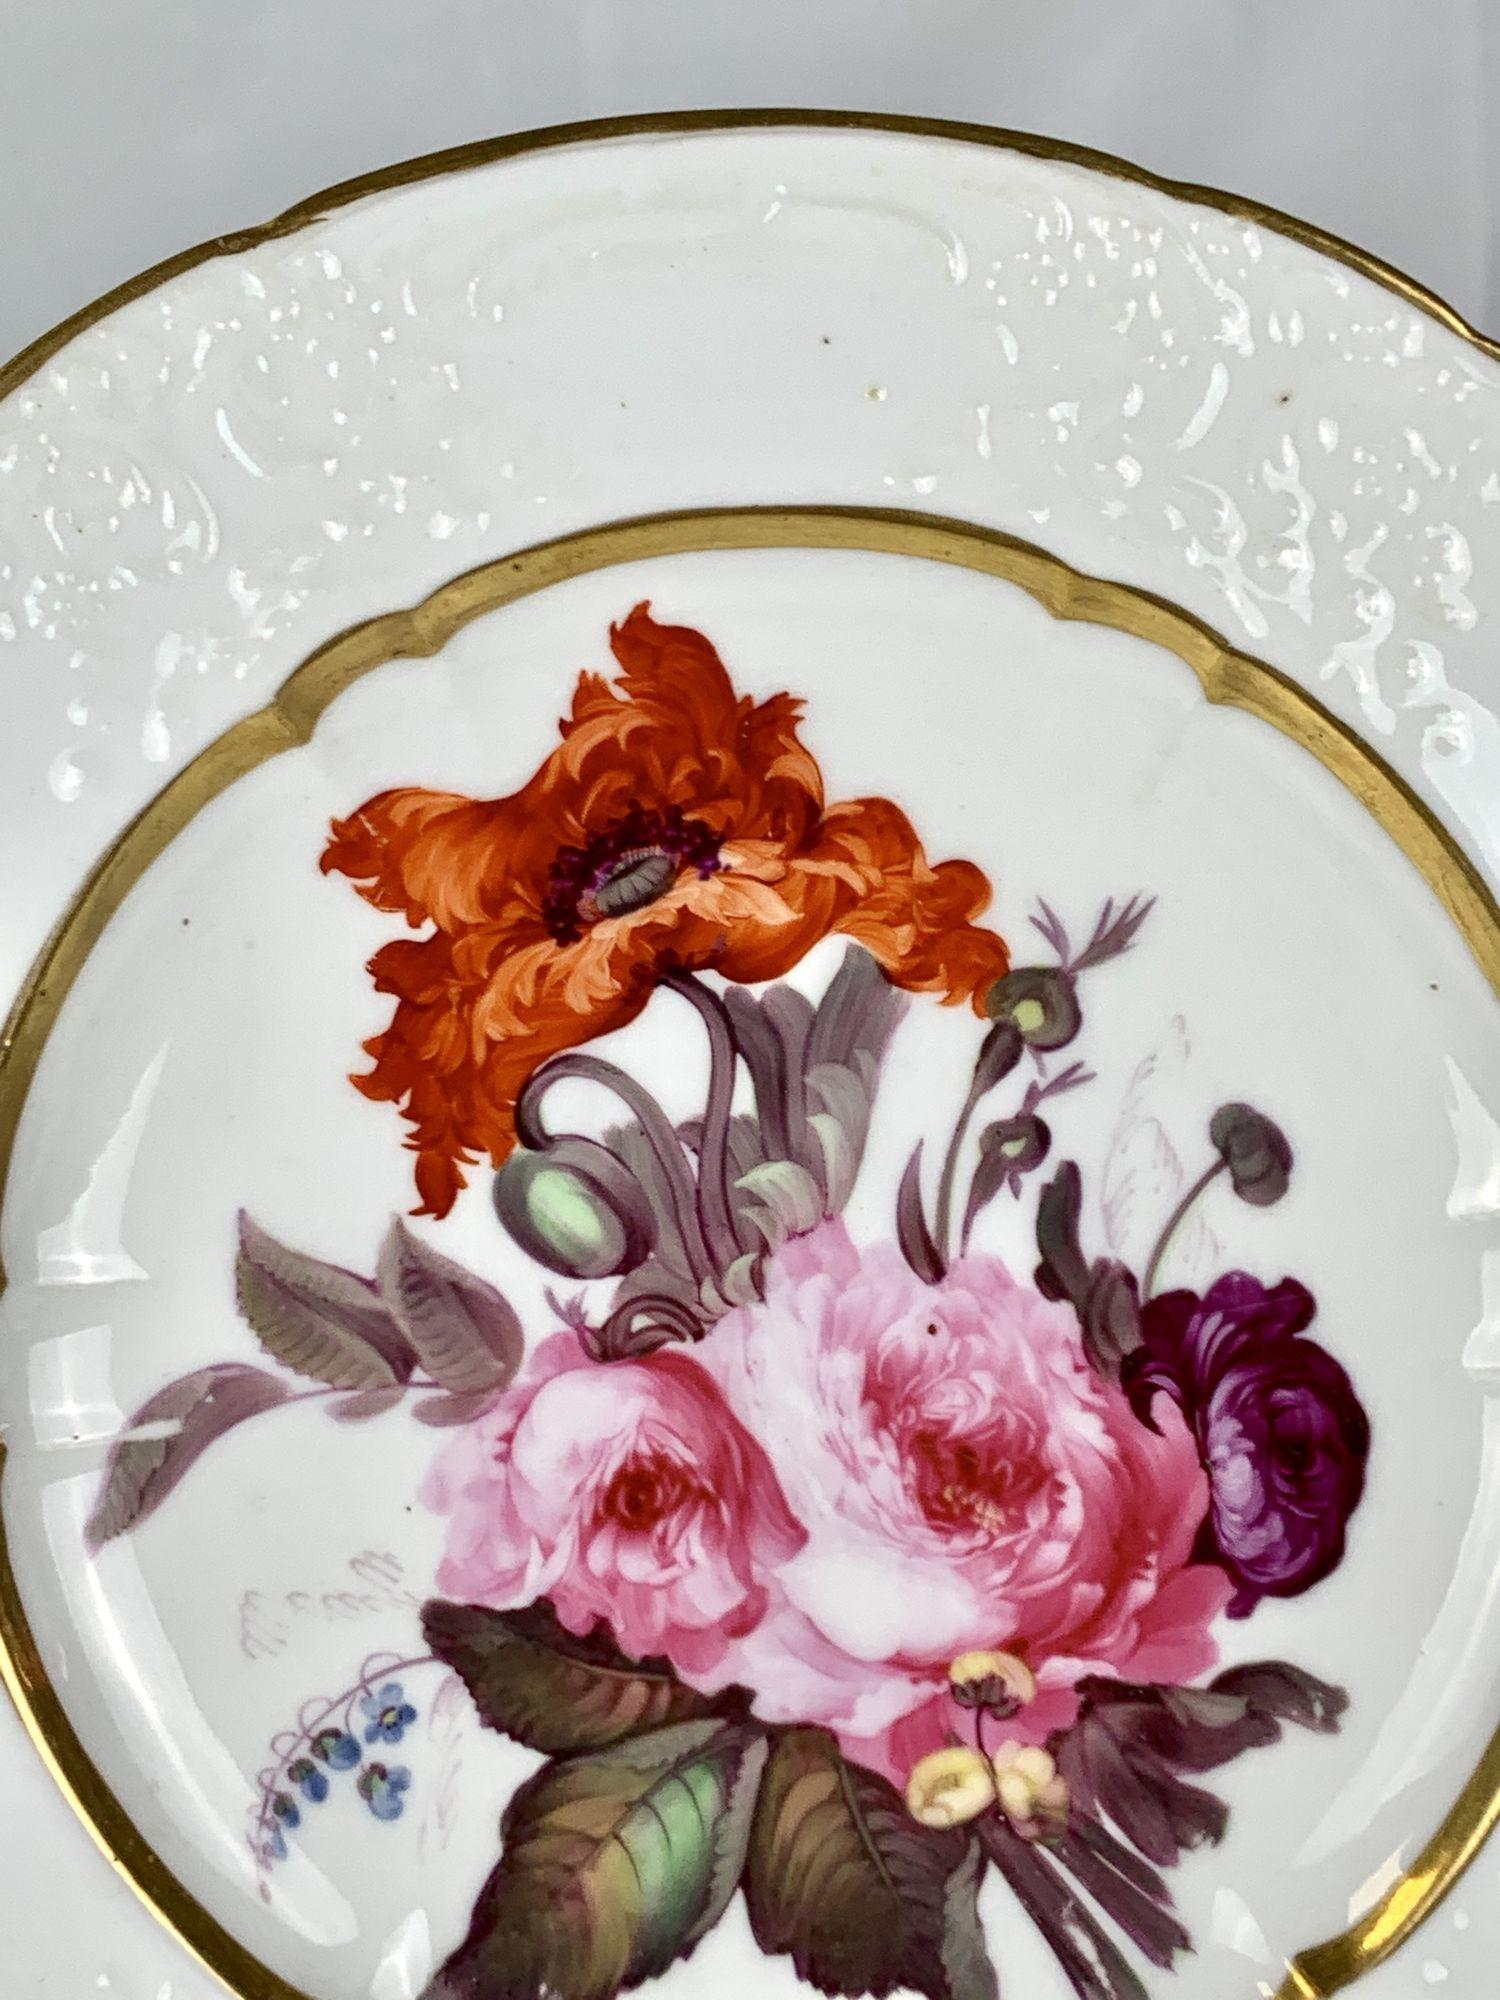 Antique English Porcelain Dish Hand Painted with Flowers 19th Century Circa 1830 For Sale 1